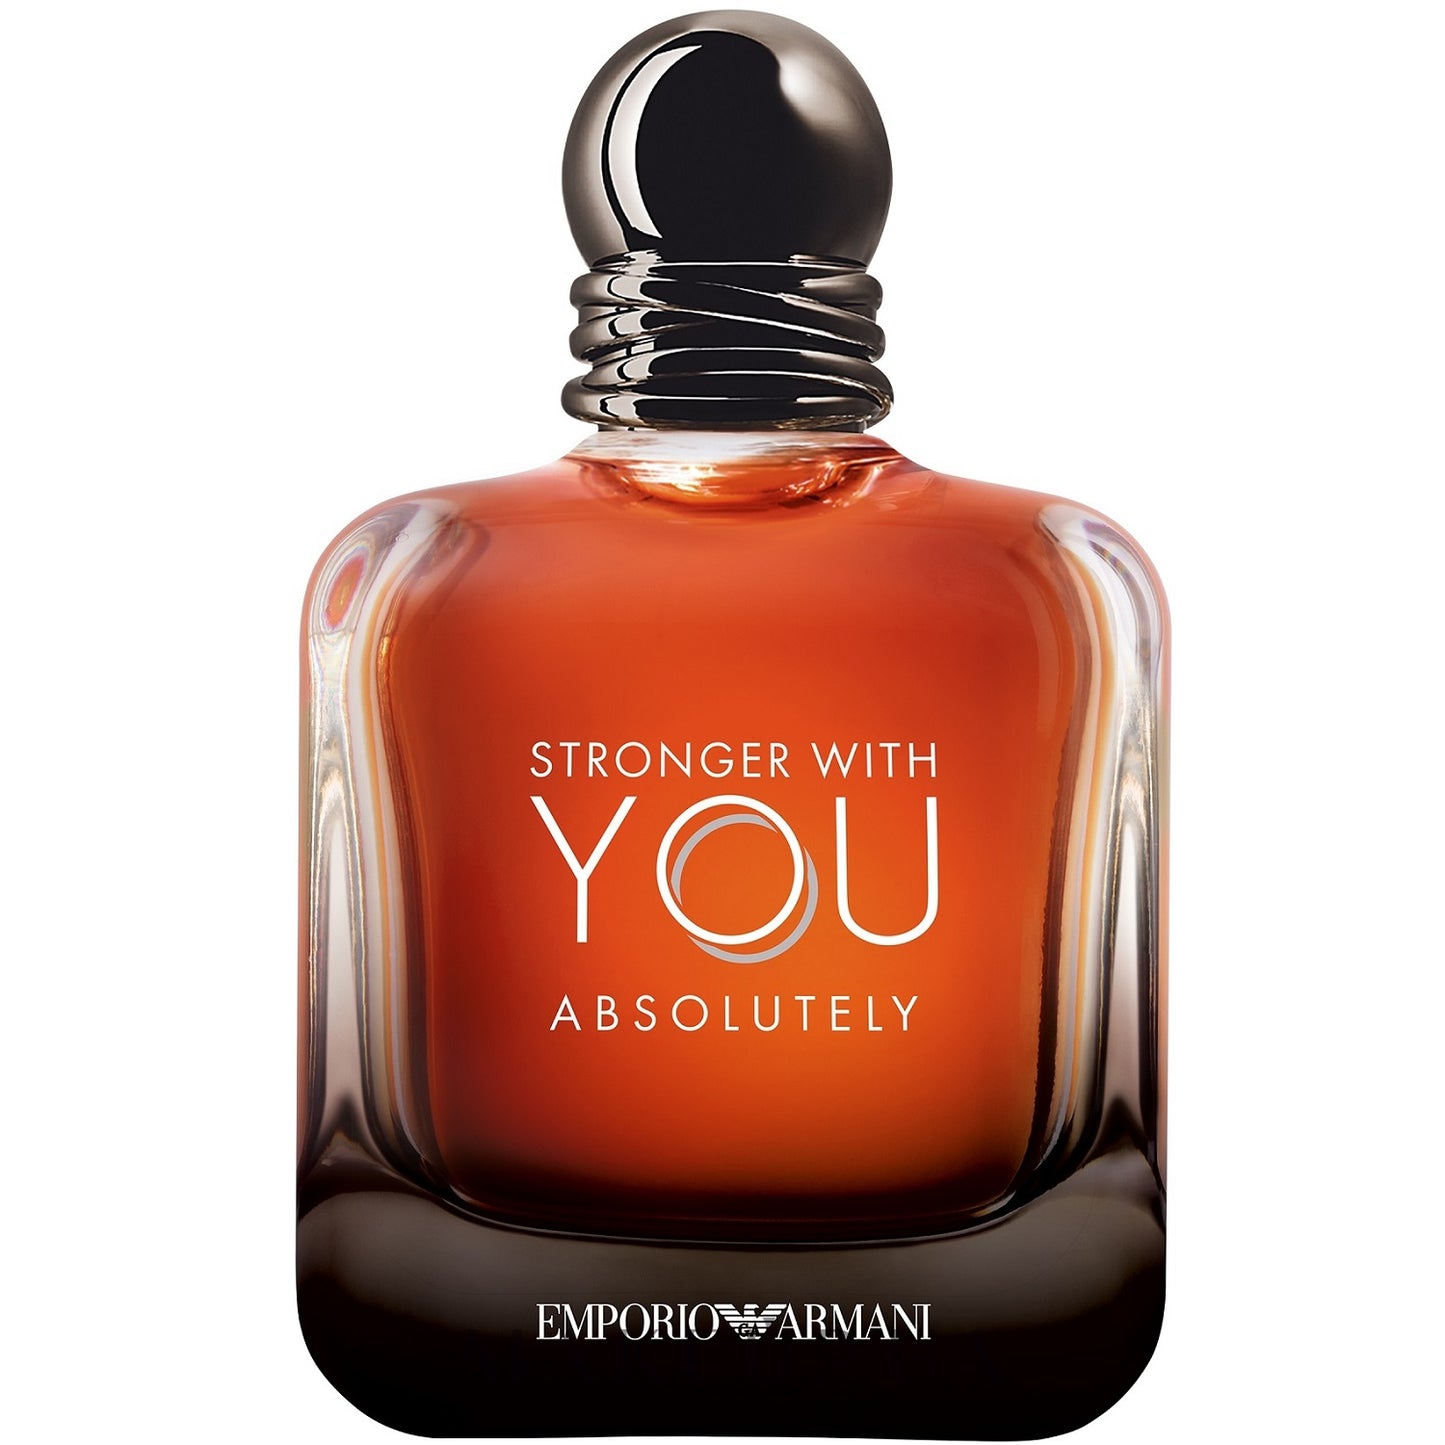 Armani - Stronger with You Absolutely EDP 100ml